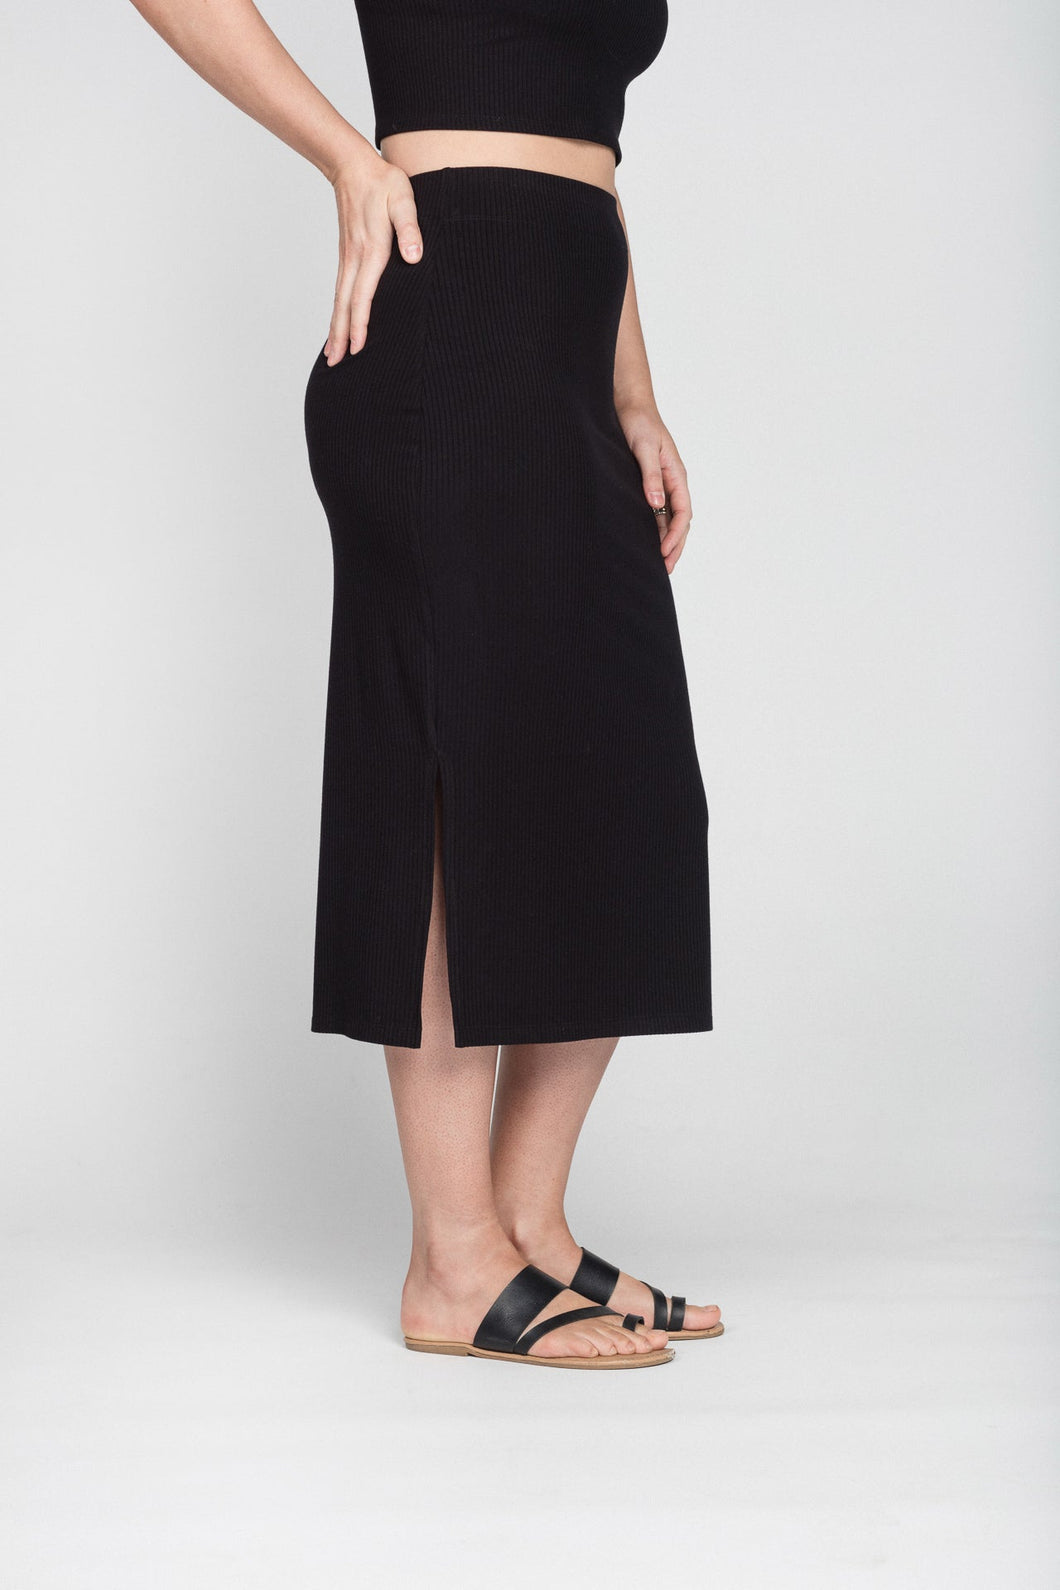 sexy black pencil skirt. Pairs perfectly with crop tops.